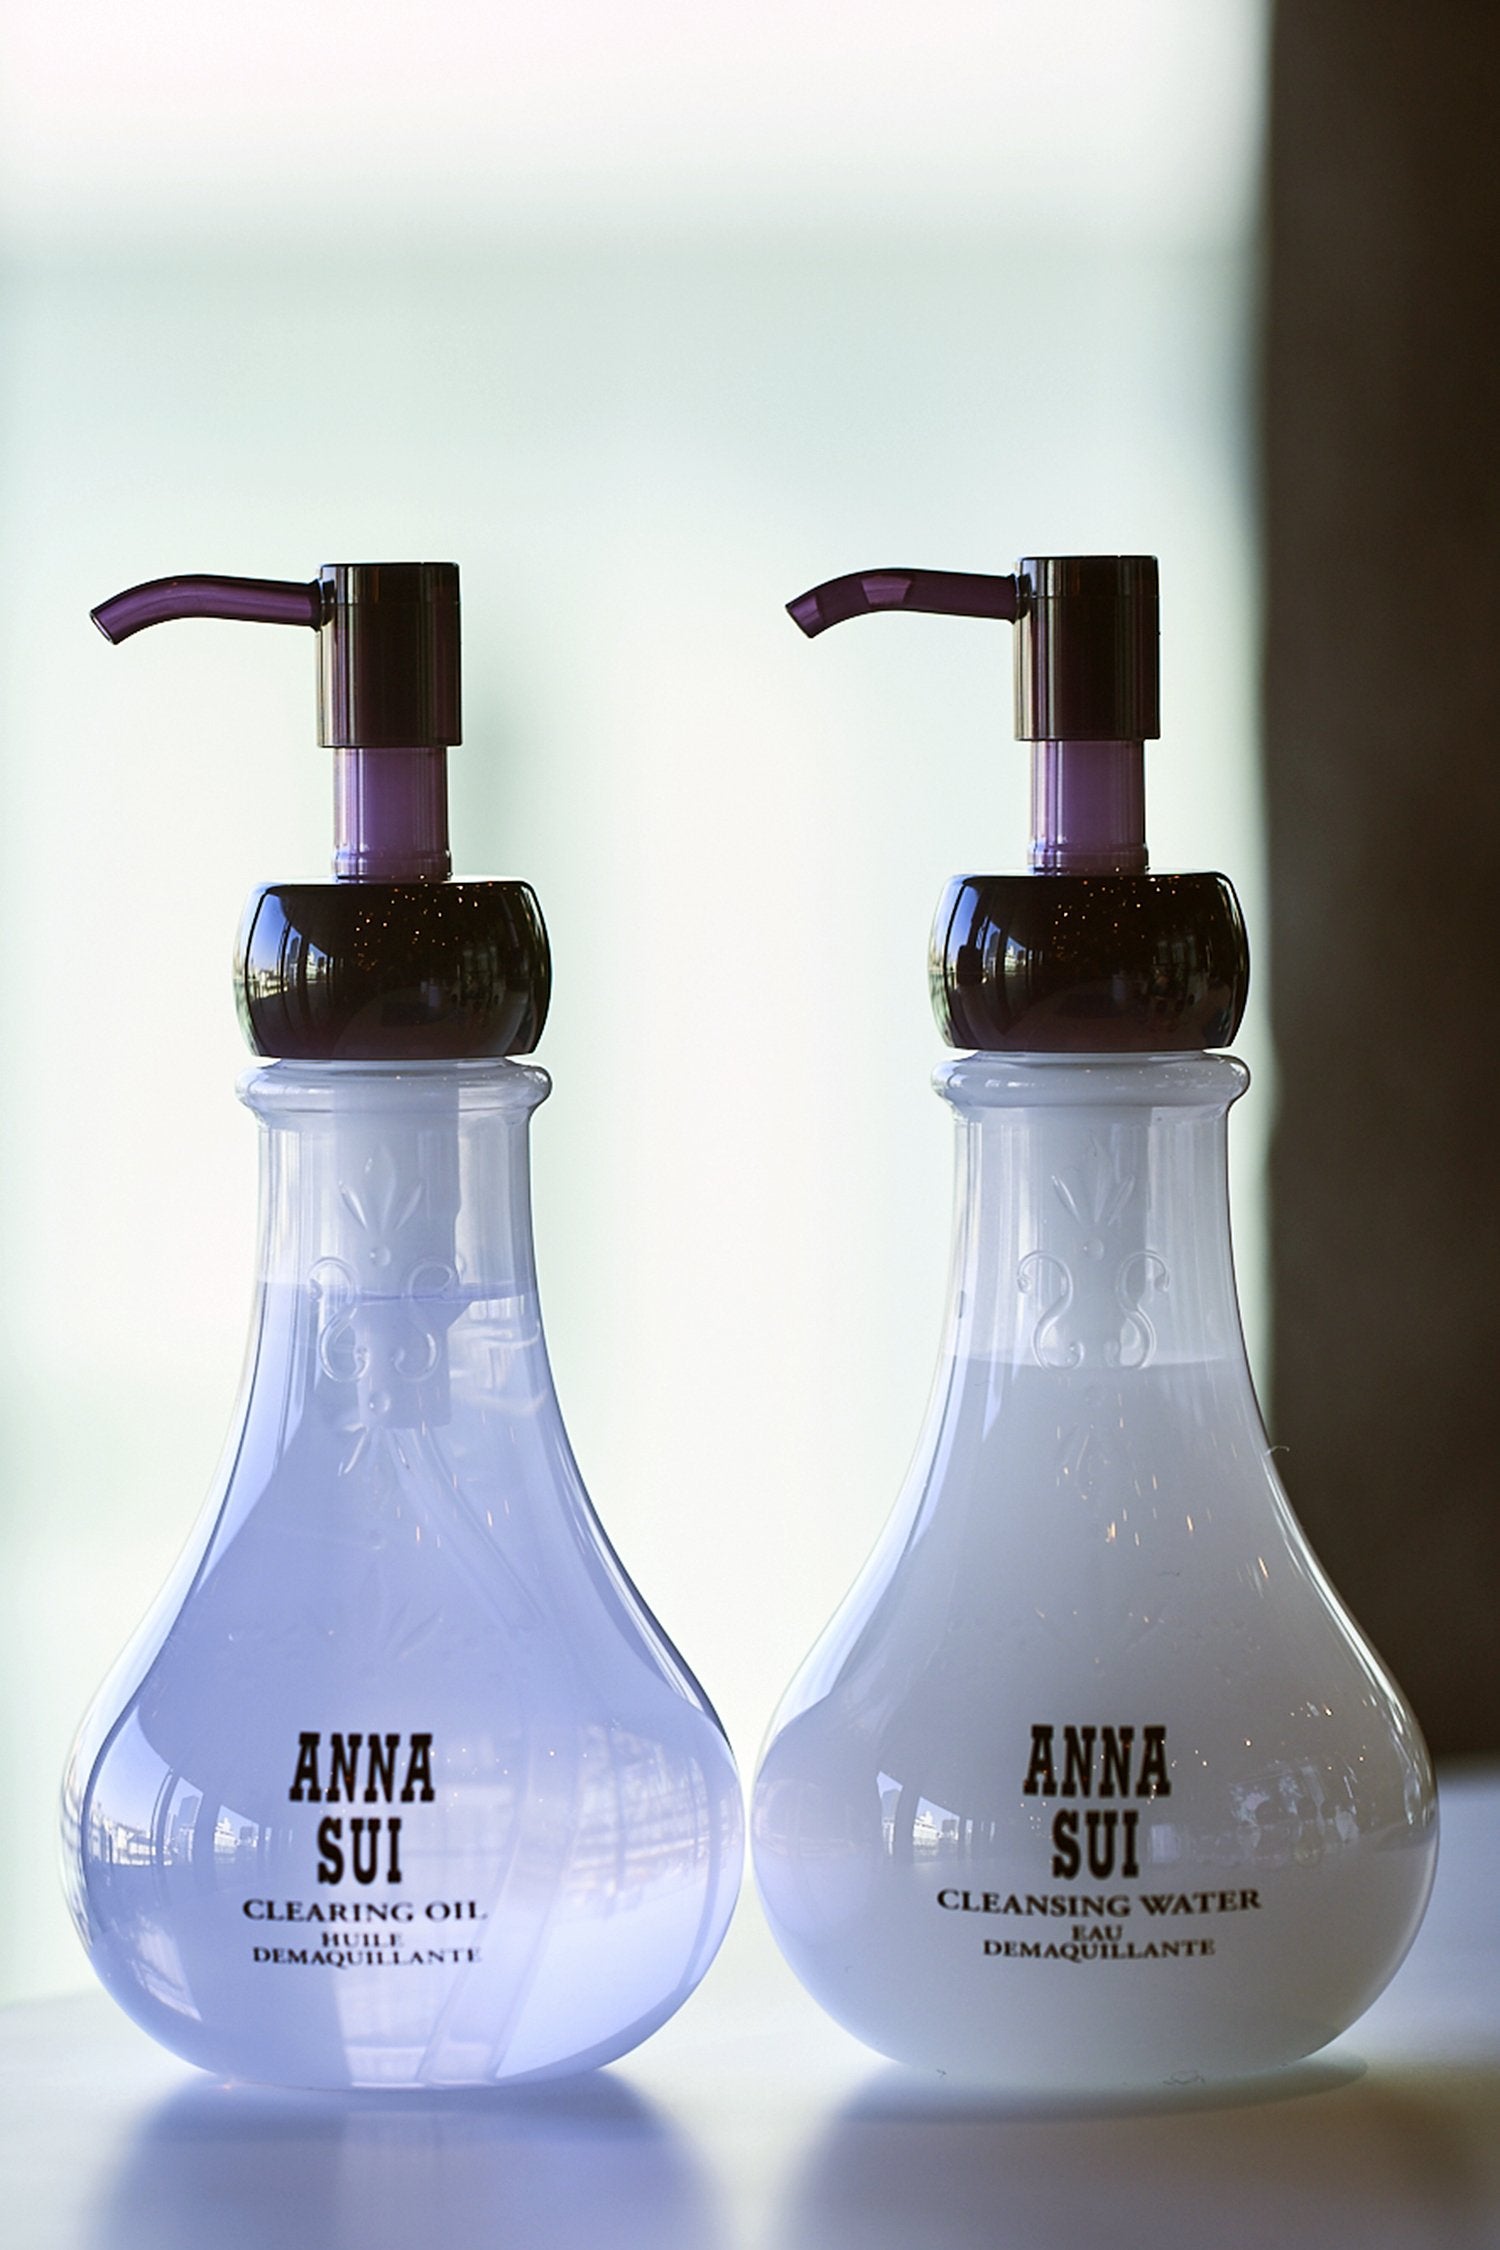 2-bulb-shaped transparent container, floral design and Anna branding, the dispenser is dark purple, 1 water, 1 oil 